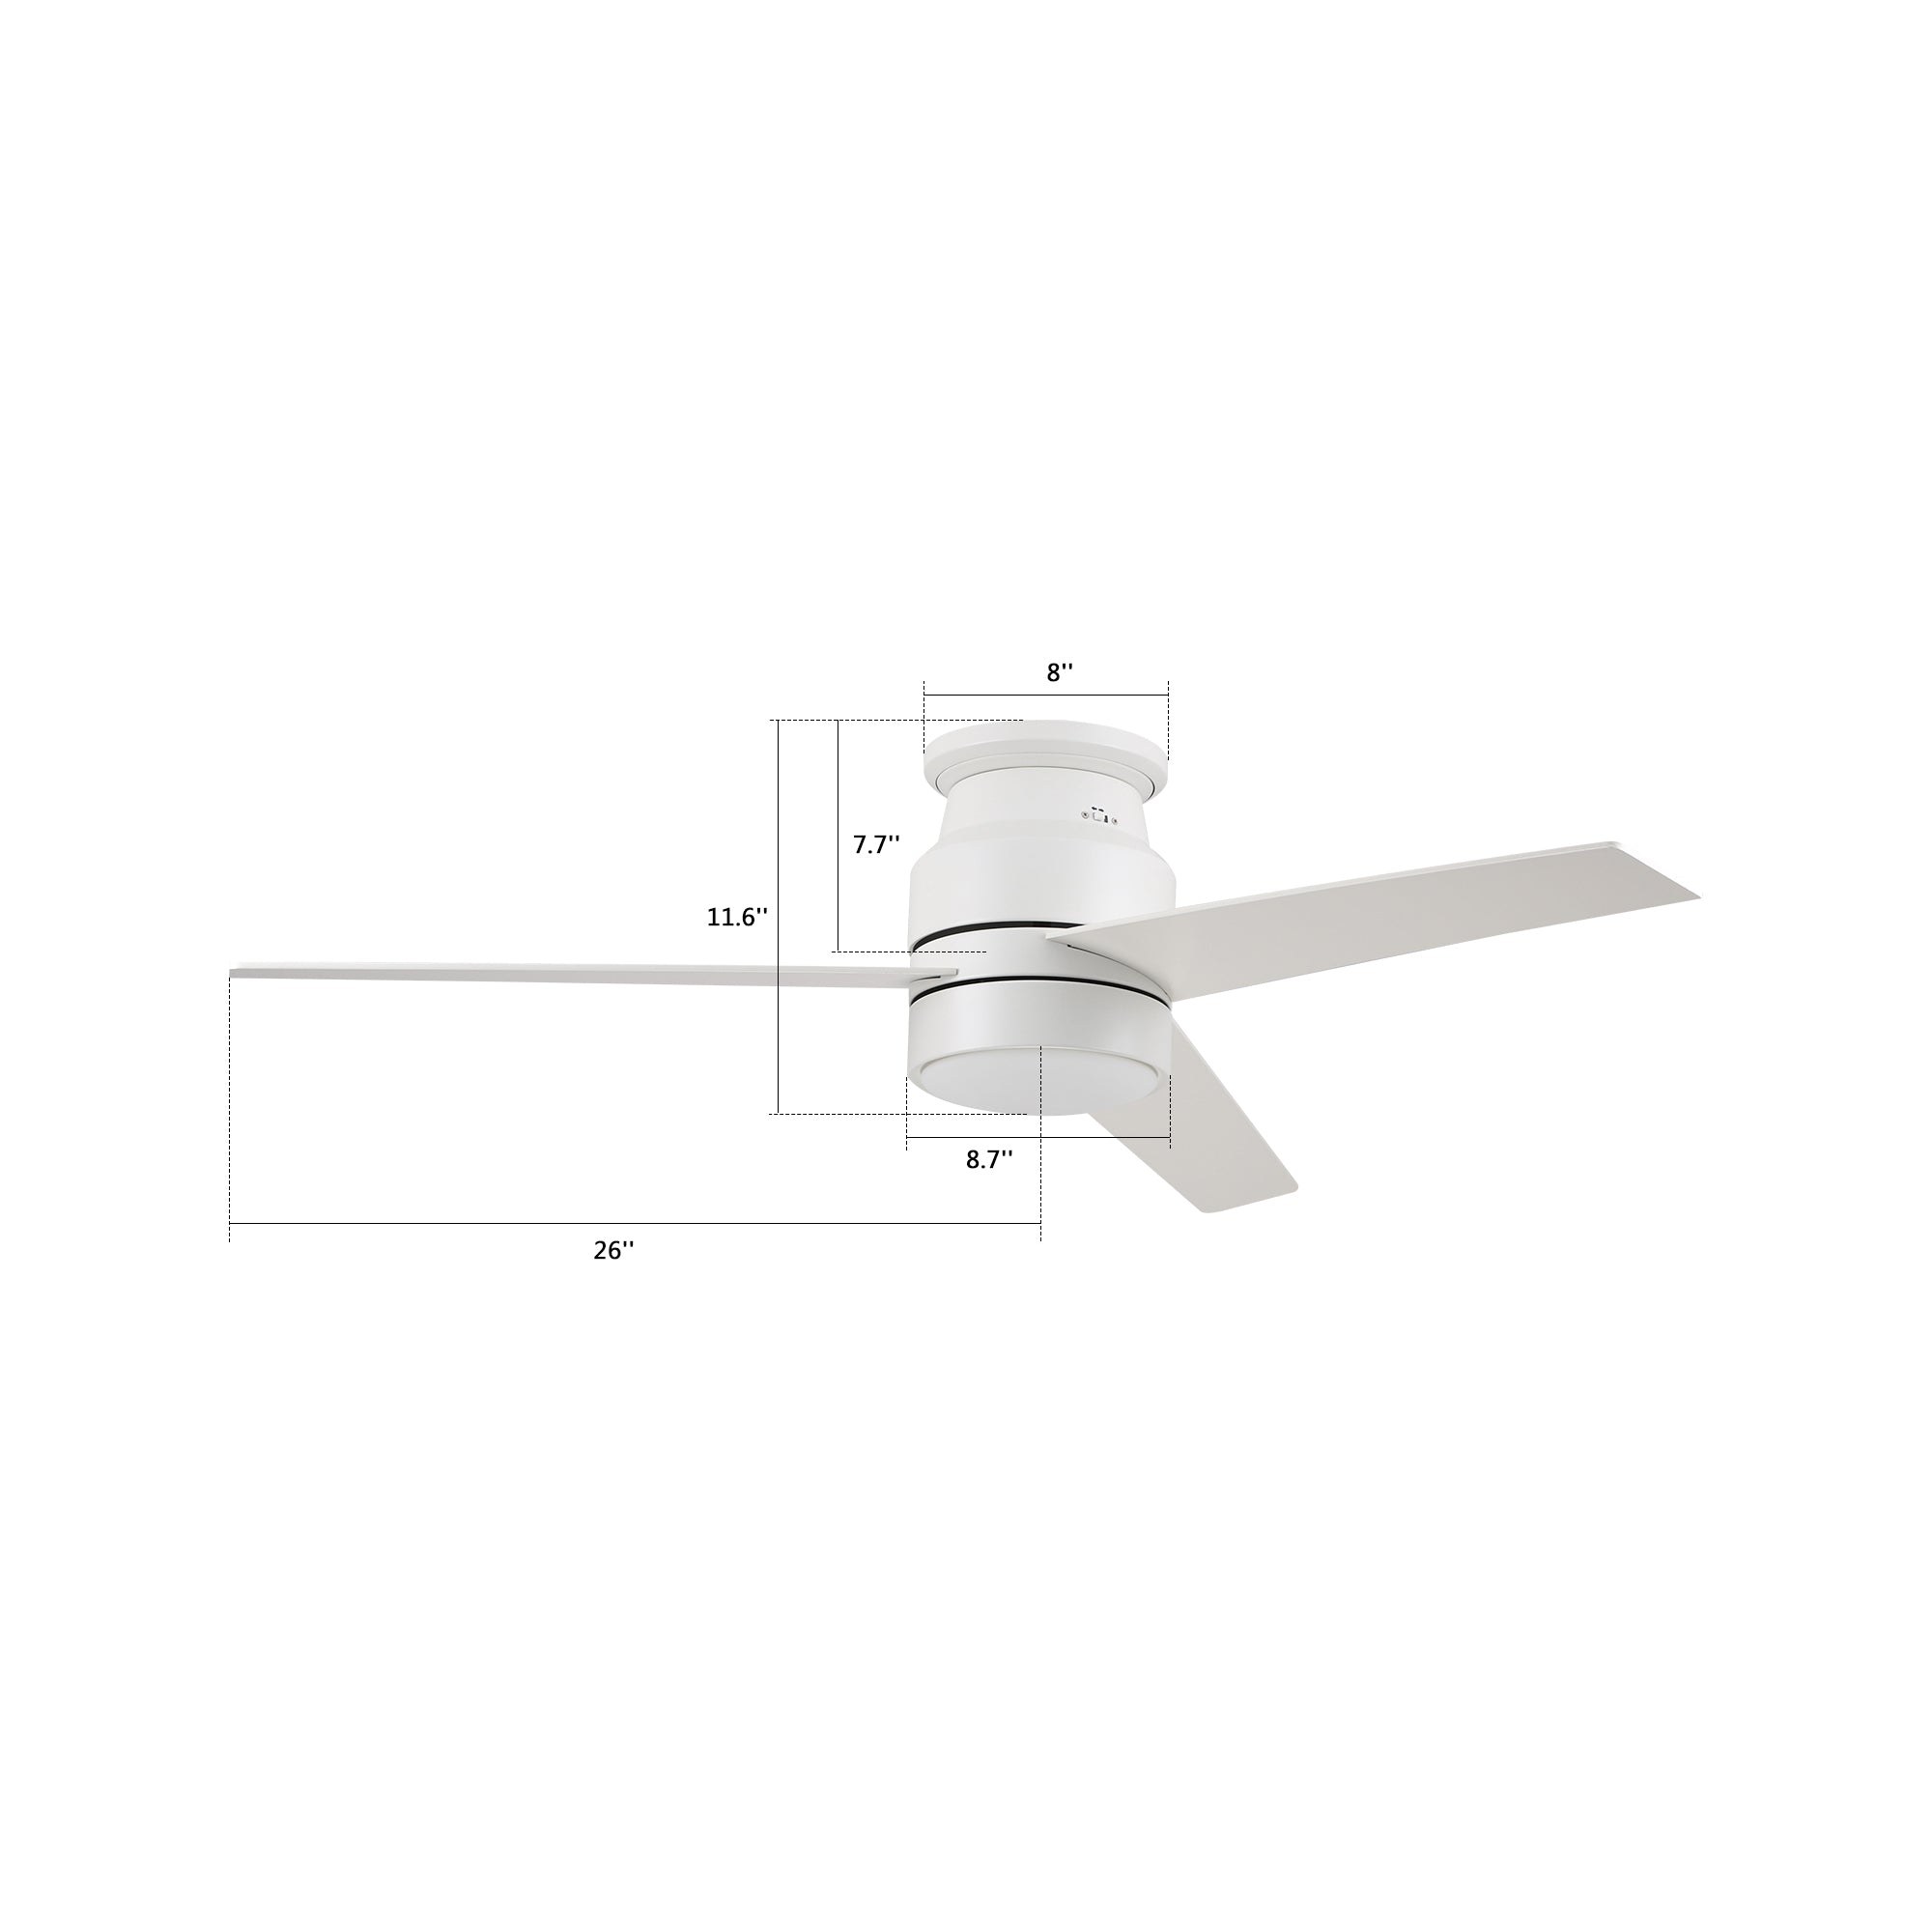 Smafan Ranger Smart Ceiling Fan blends elegantly into its surroundings while providing a cooling effect and strong airflow that large indoor living spaces need. Ranger’s energy-efficient LED light kit has 3000 lumens and lasts over 50000+ hours and its warm soft white light creates an inviting space. Ranger’s energy-efficient and completely silent motor provides a comfortable environment for any indoor spaces. 